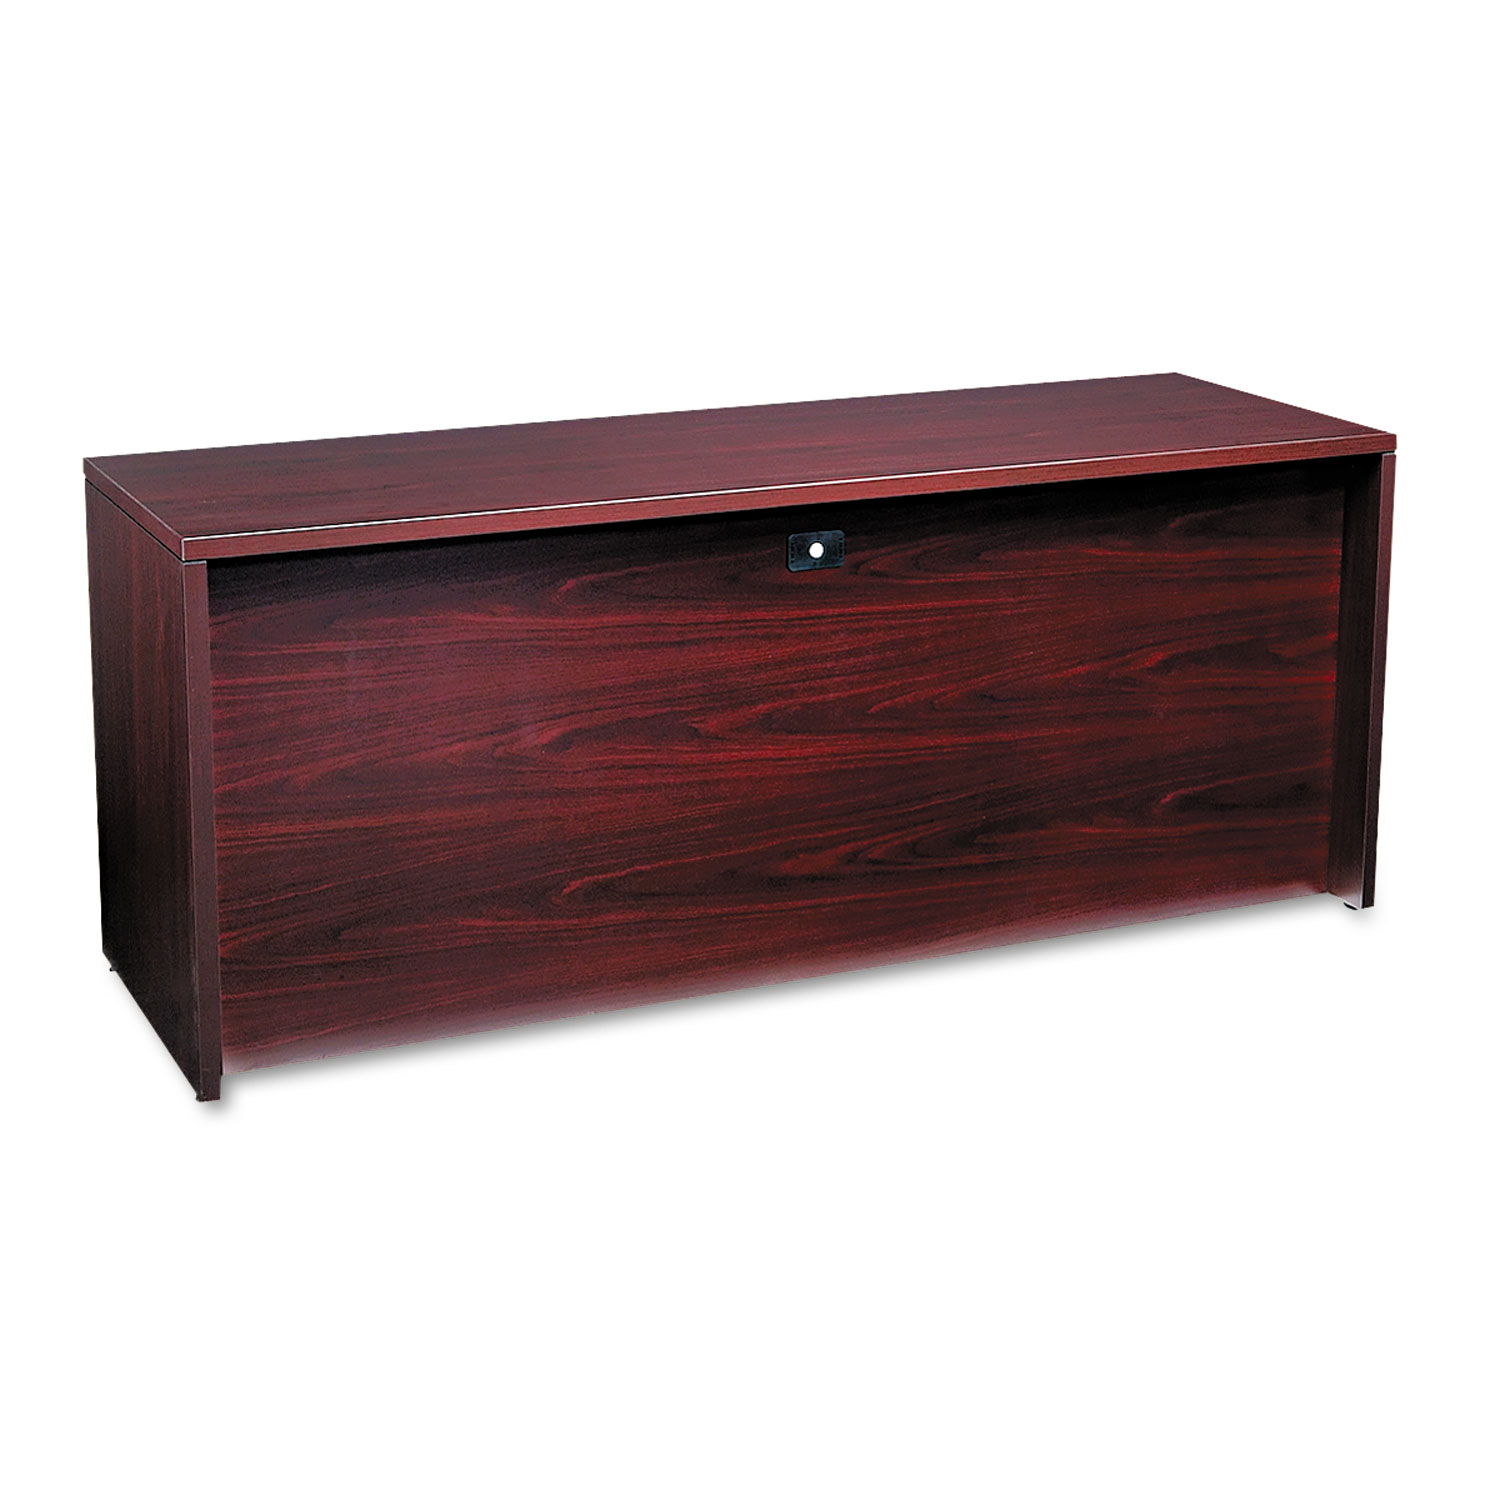 10500 Series 3/4-Height Right Pedestal Credenza, 72w x 24d x 29-1/2h, Mahogany